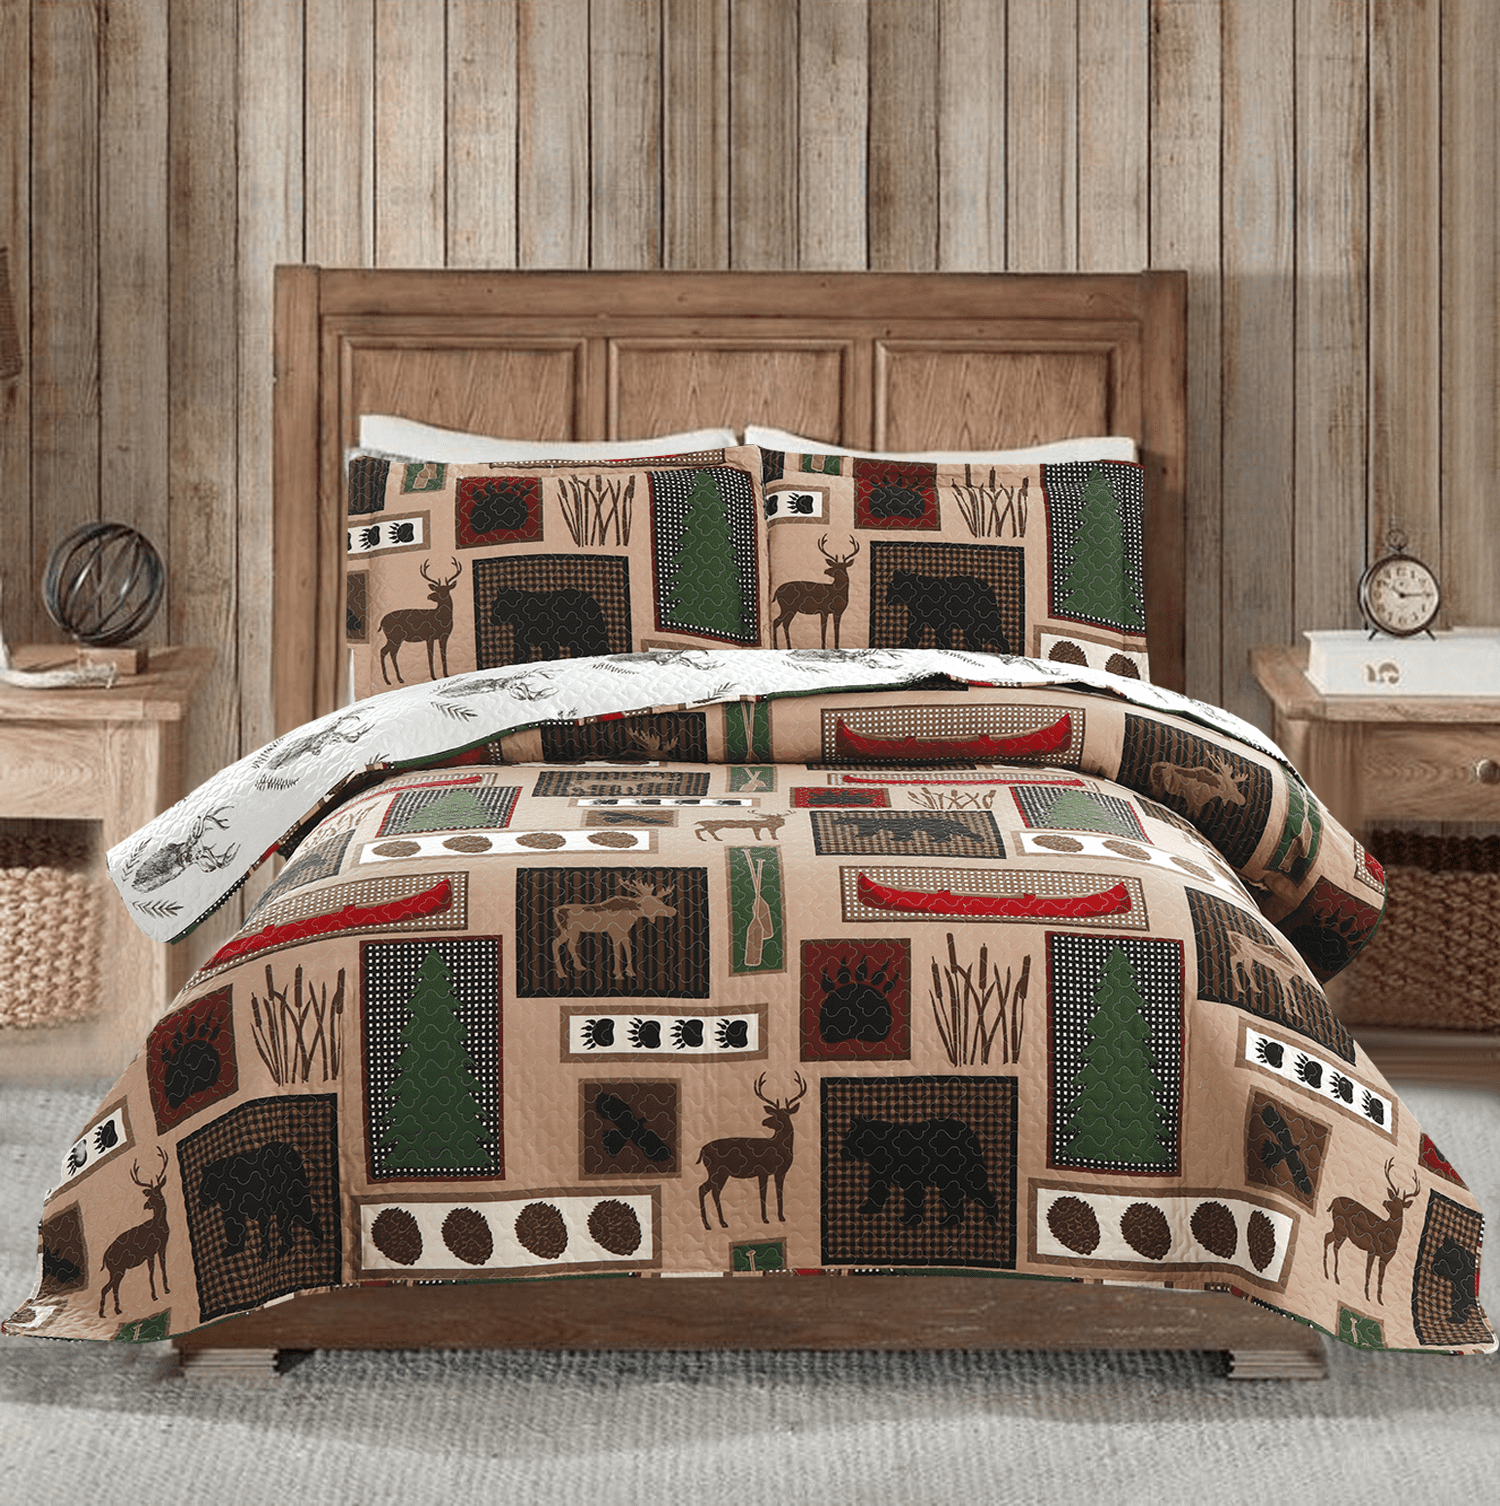 River Fly Fishing Themed Rustic Cabin Lodge Quilt Stitched Bedspread Bedding  Set with Fishing Rods Lure with Southwestern Tartan Check Plaid Tweed  Patterns Blue Brown - River Lodge (Full/Queen) 